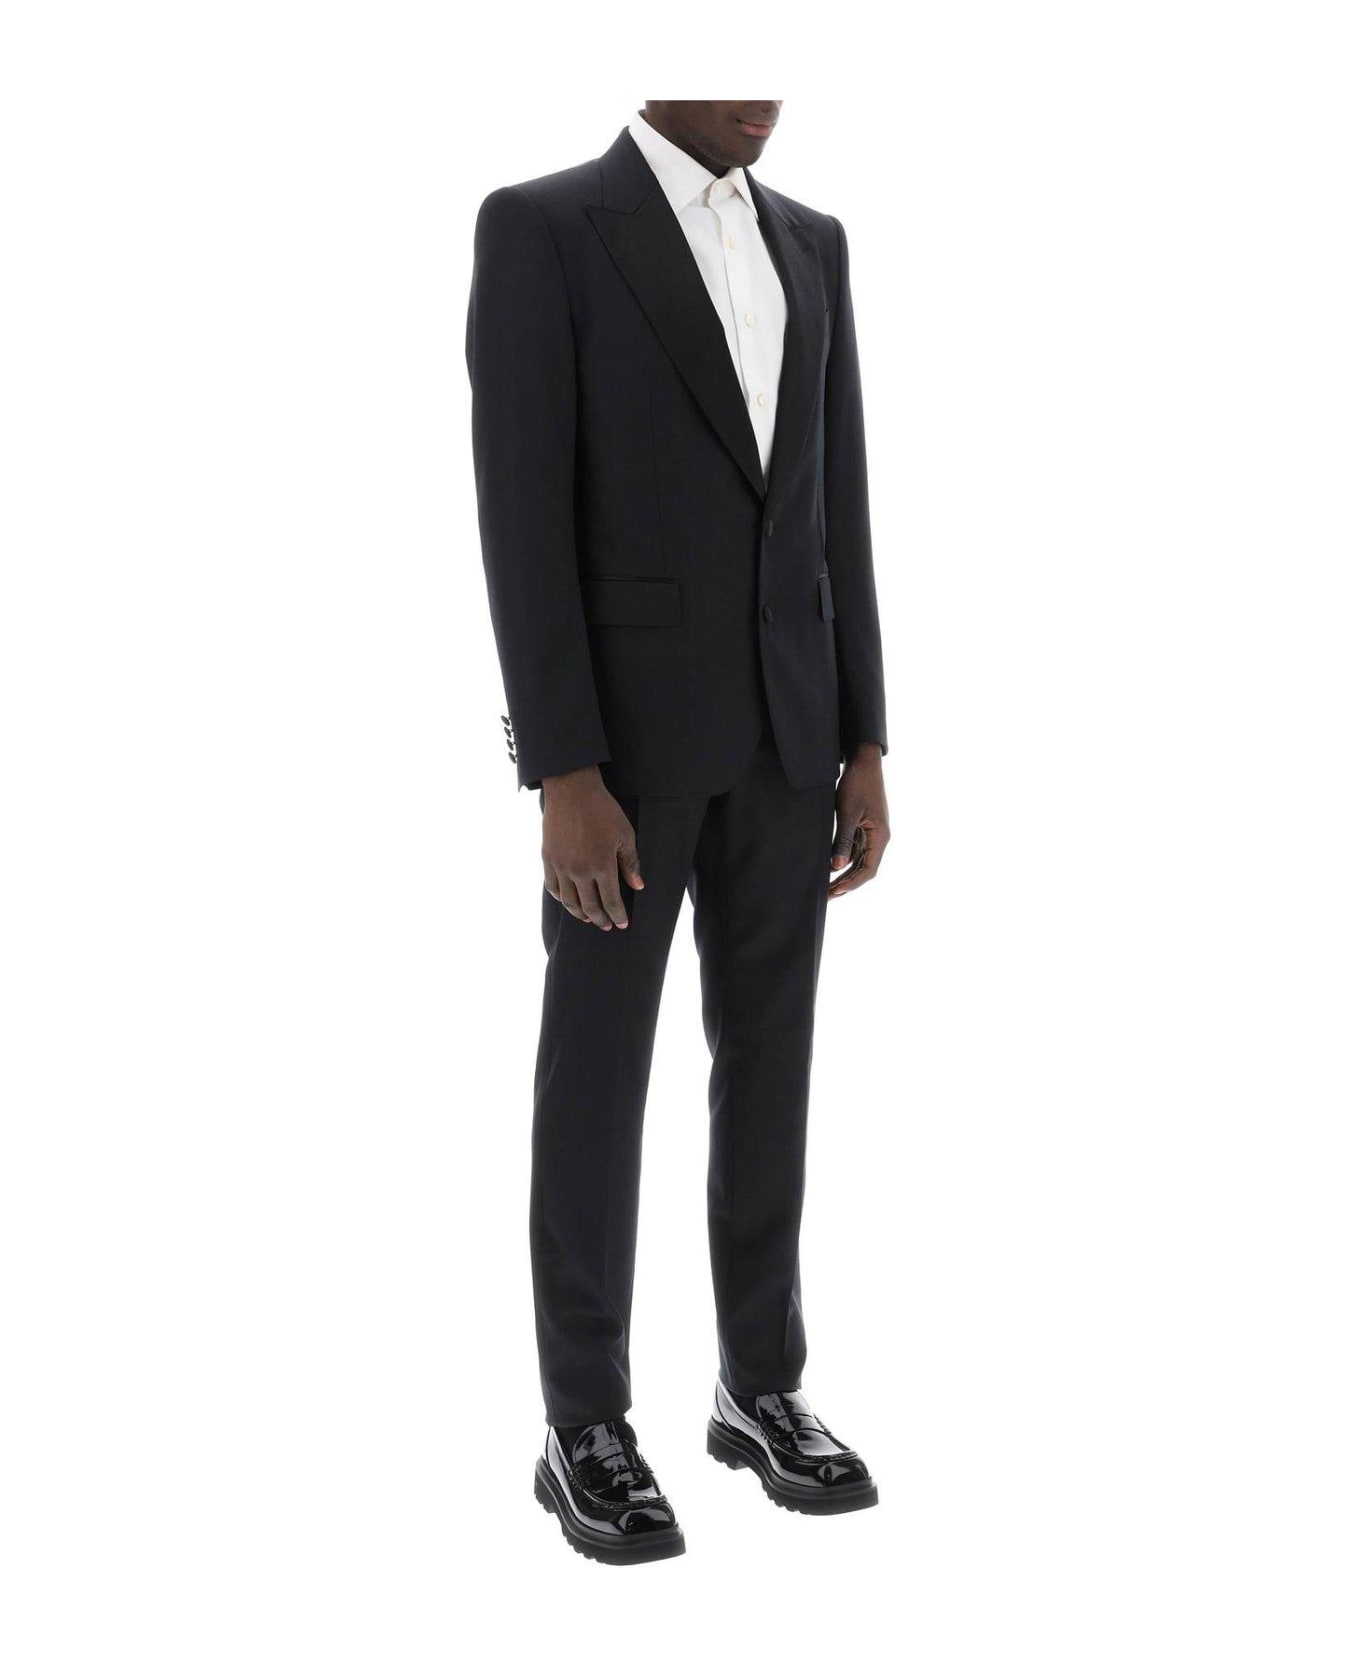 Dolce LACE & Gabbana Single-breasted Pressed Crease Tailored Suit